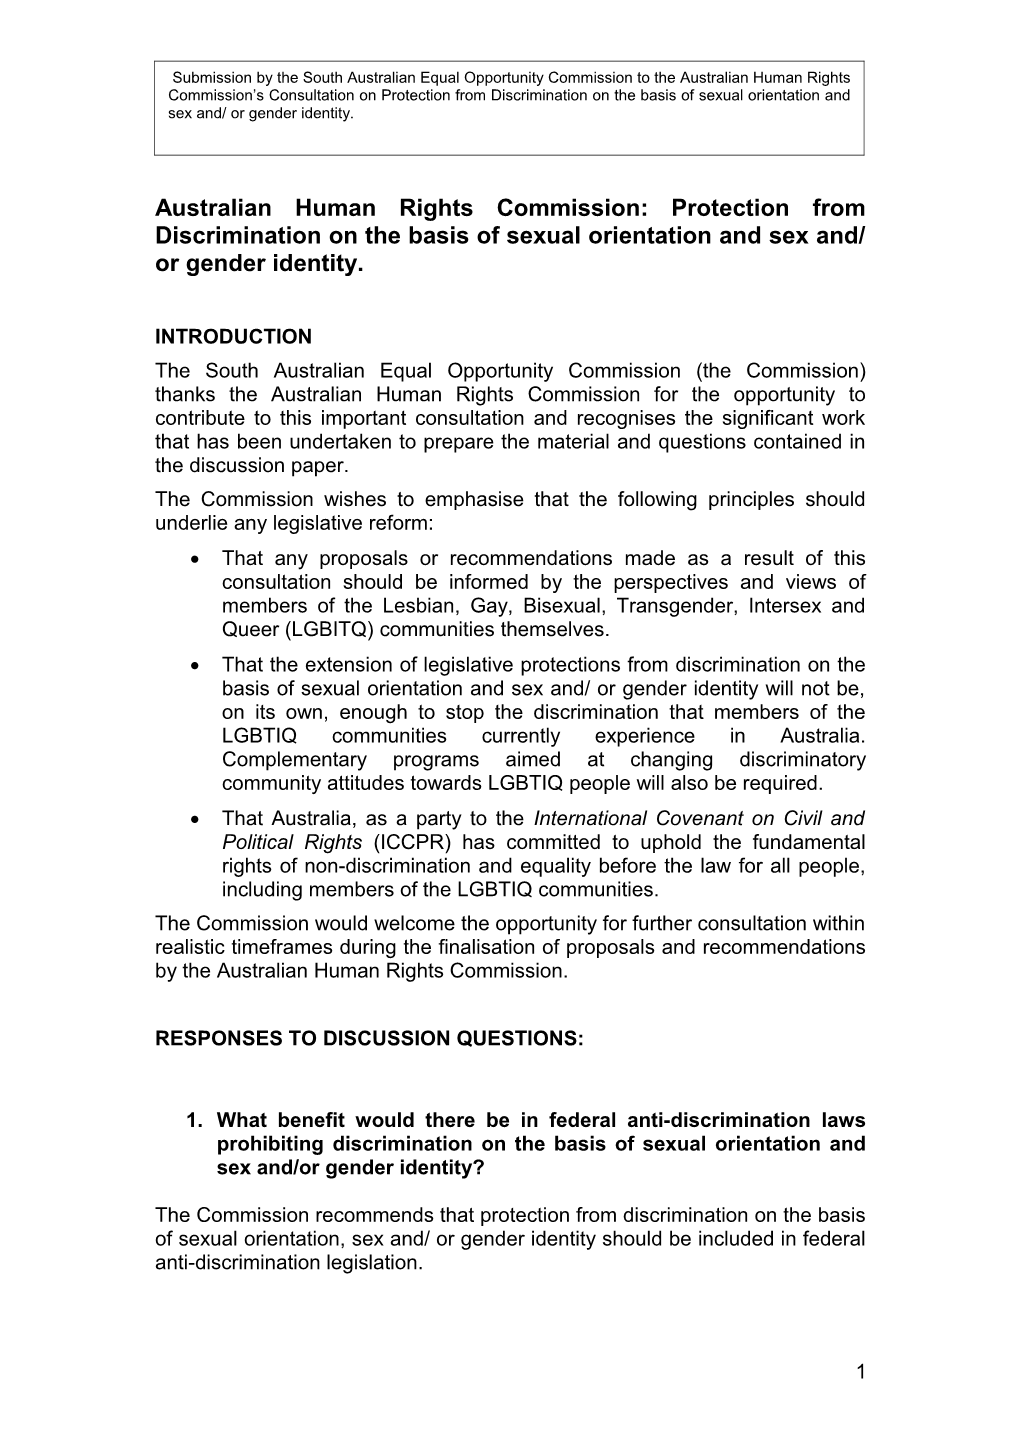 Australian Human Rights Commission: Protection from Discrimination on the Basis of Sexual